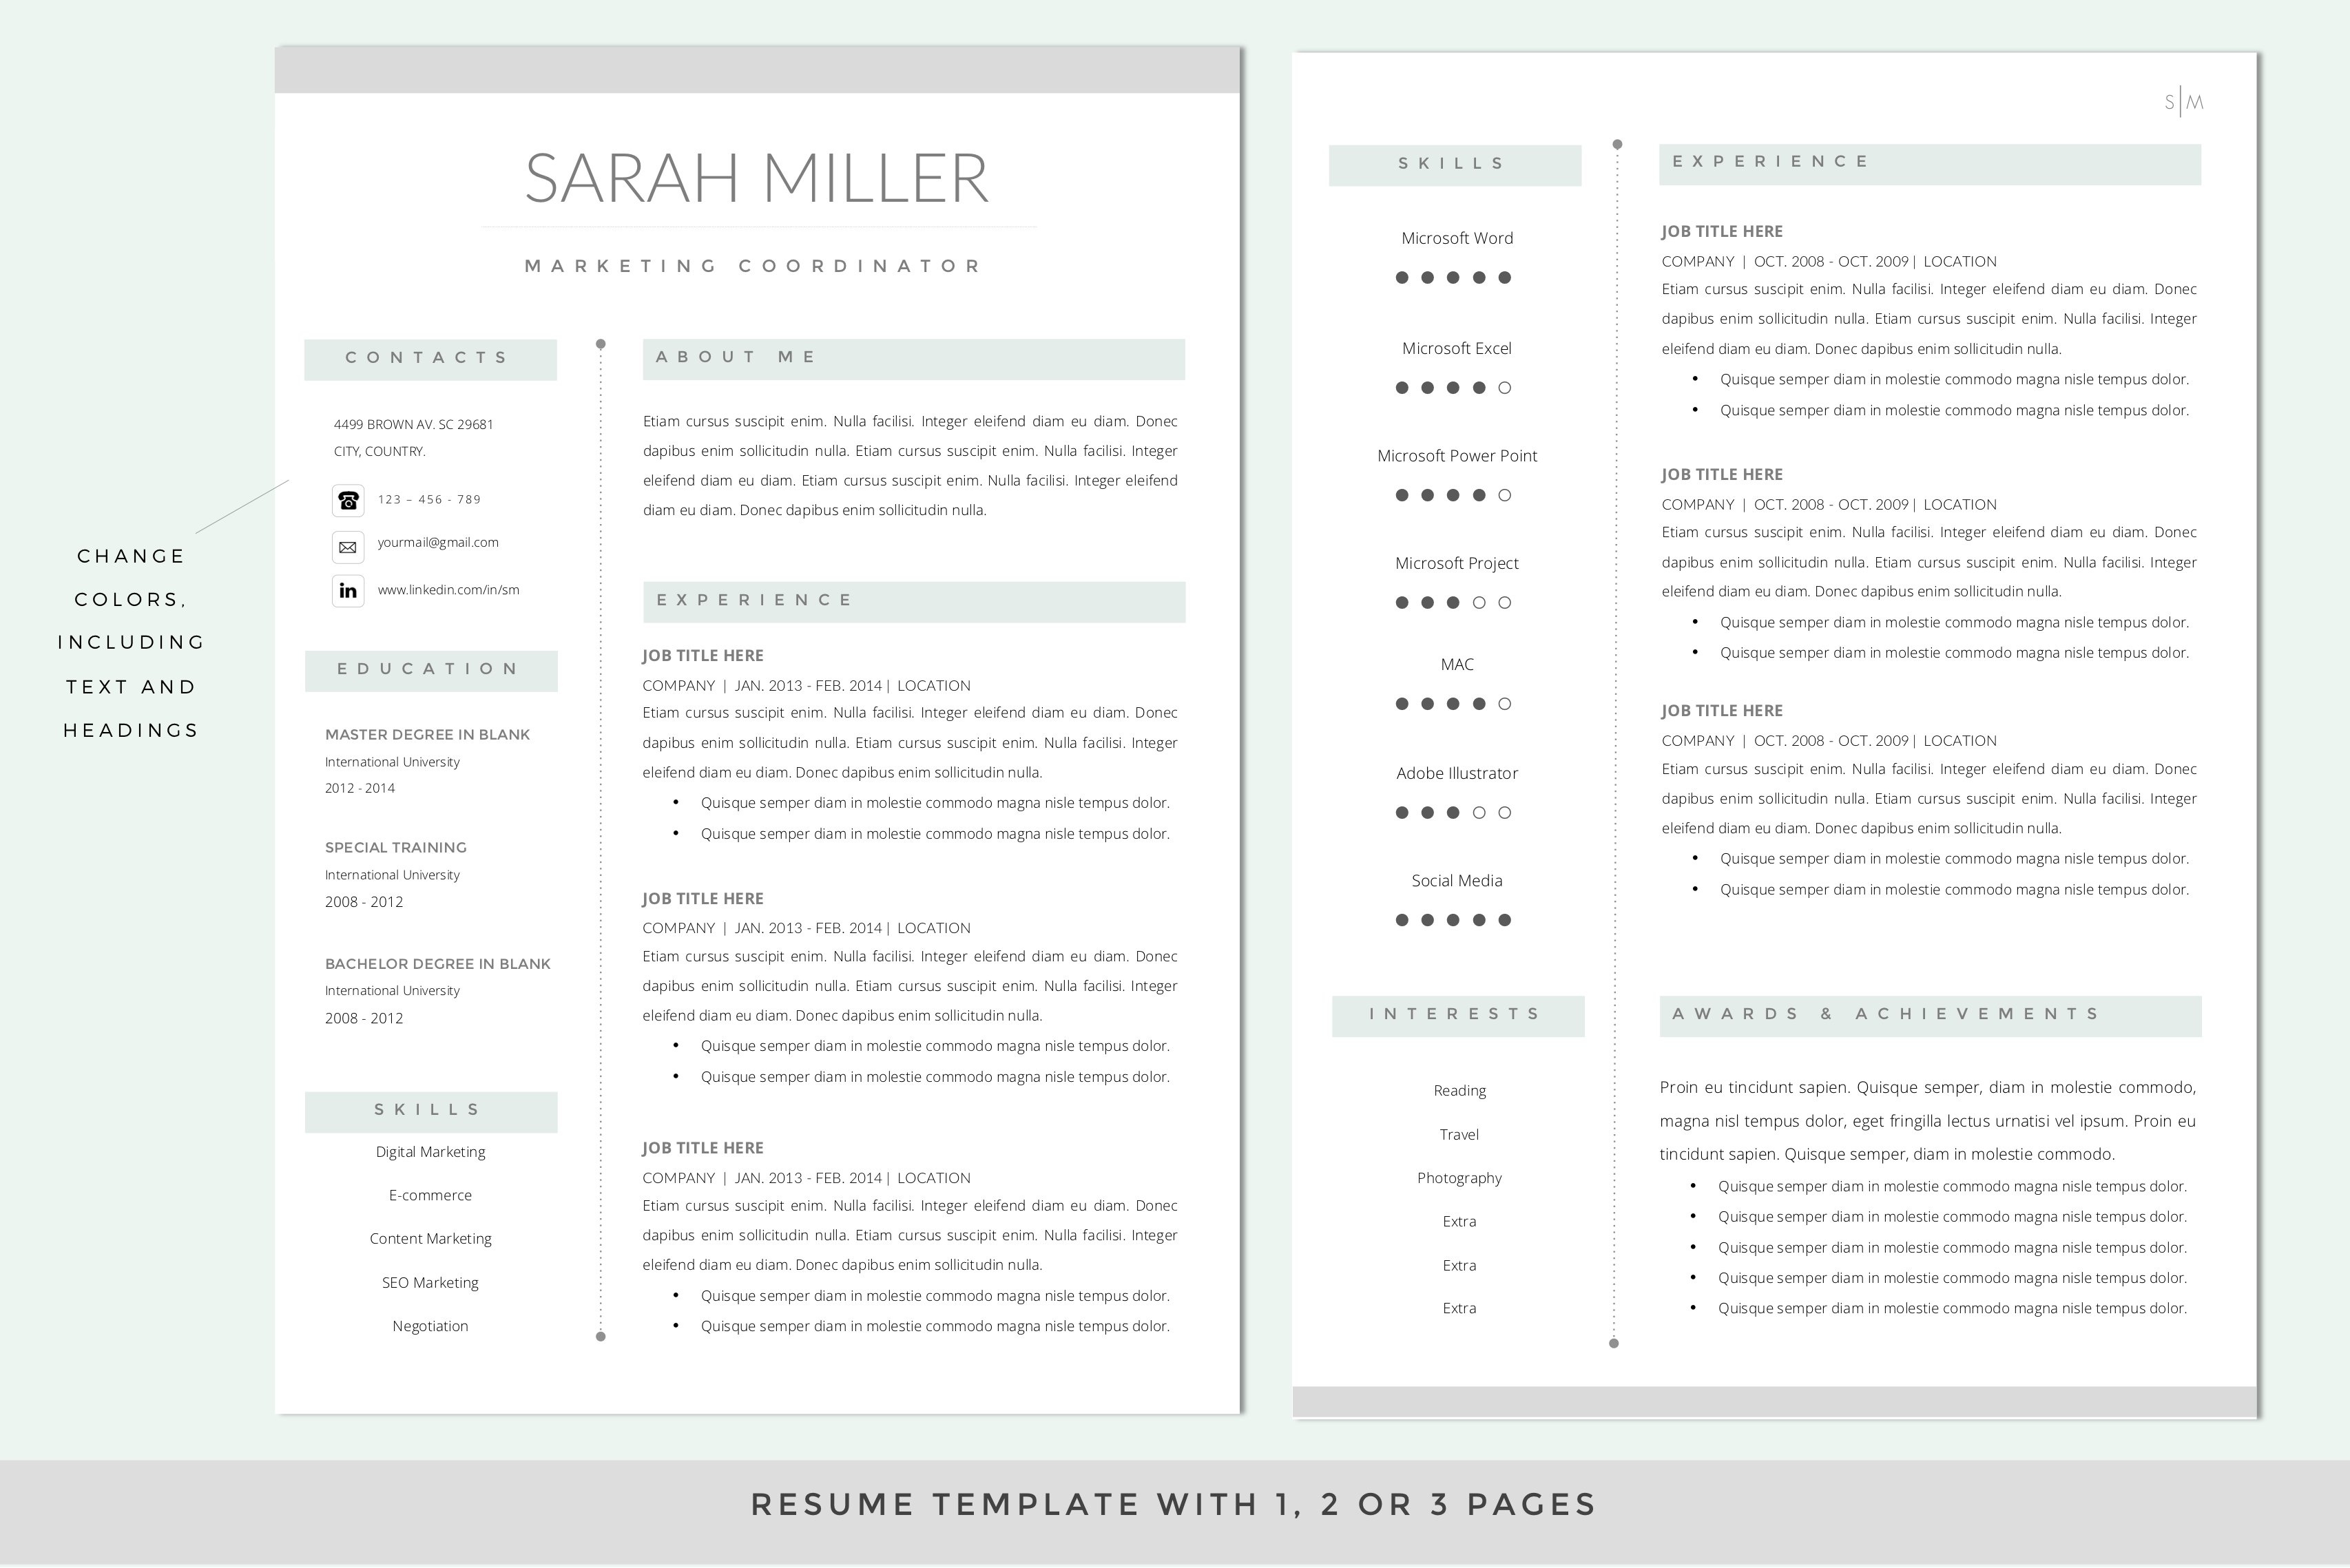 Resume CV Template & Cover Letter preview image.